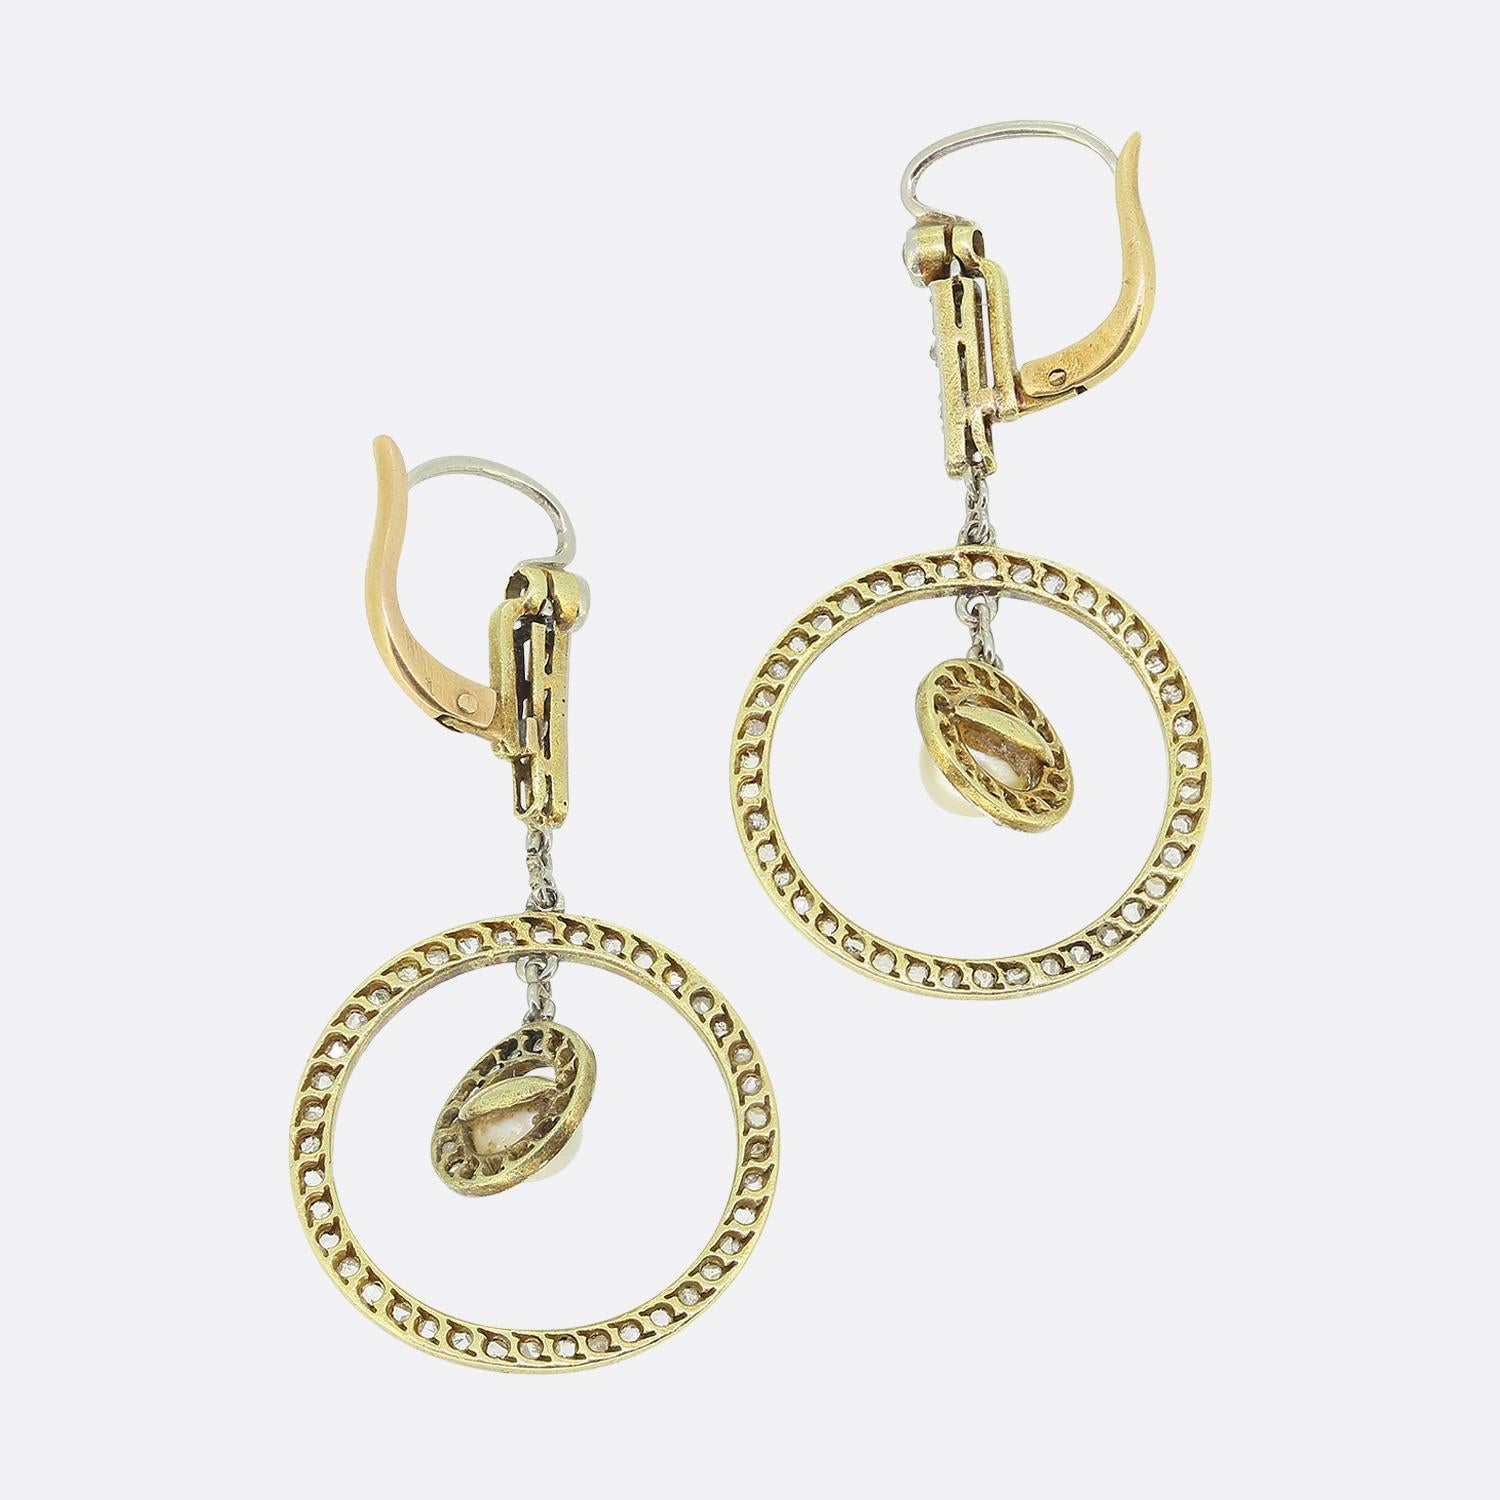 Here we have an excellent pair of drop earrings from the turn of the 20th century. Each piece has been crafted from 18ct yellow gold and showcases five rose cut diamonds which have been platinum set in a vertical fashion; designed to suspend a